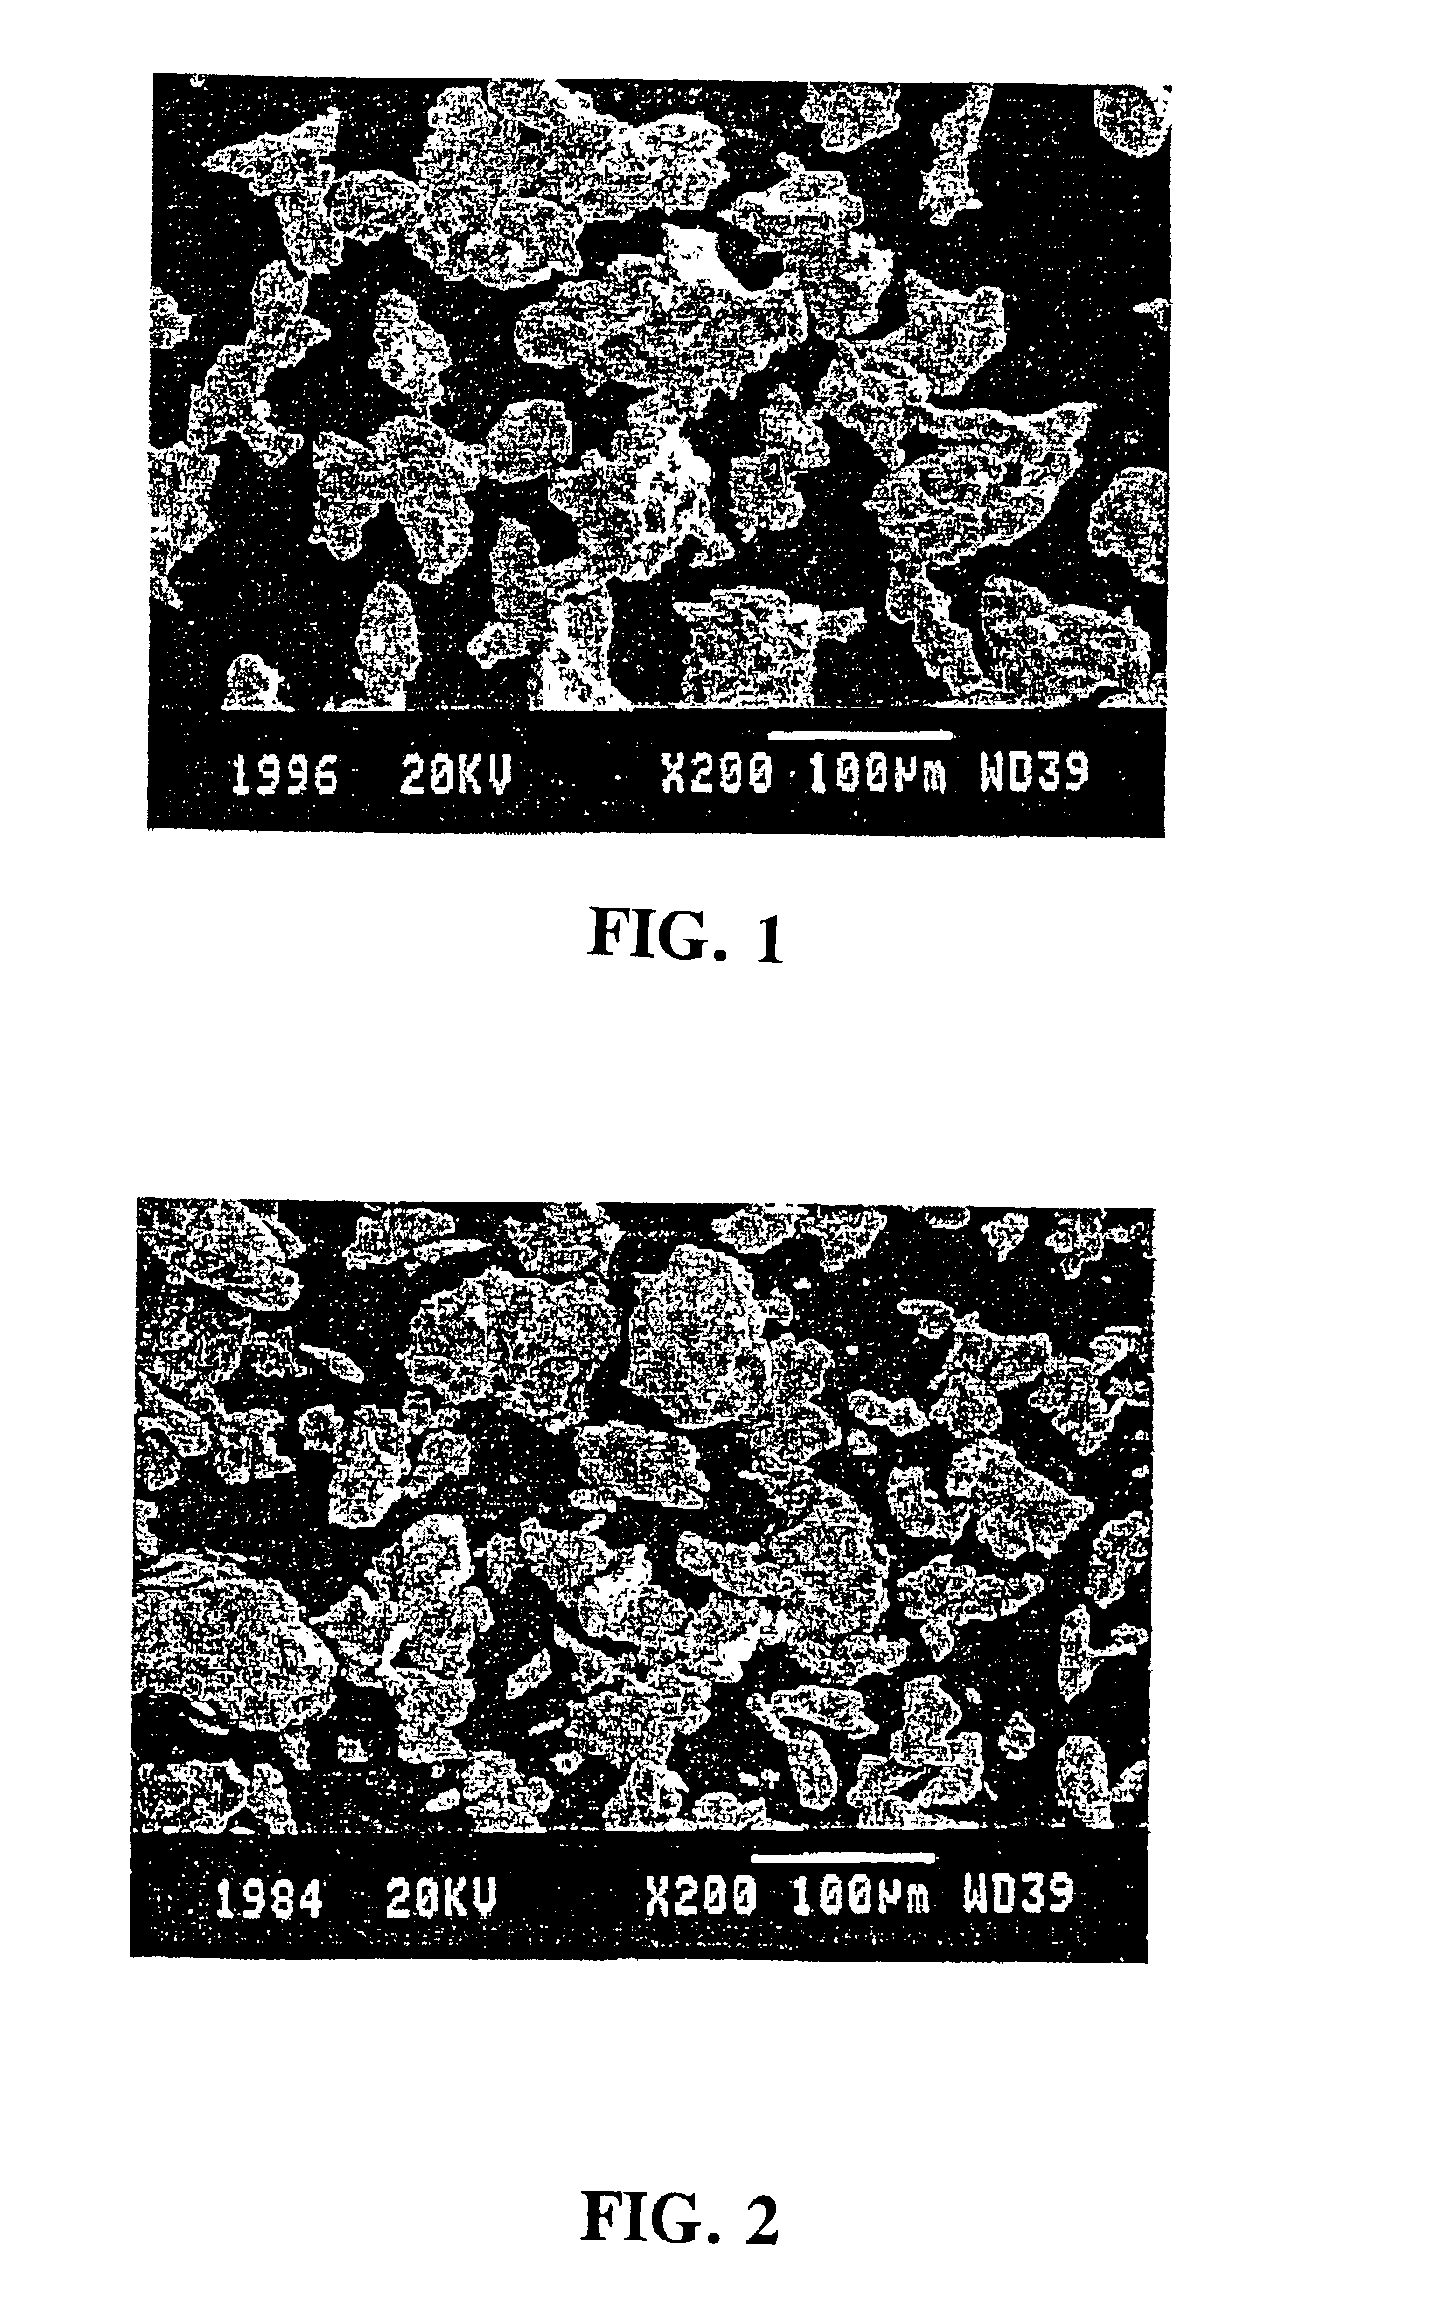 Methods for modifying oxygen content of atomized intermetallic aluminide powders and for forming articles from the modified powders